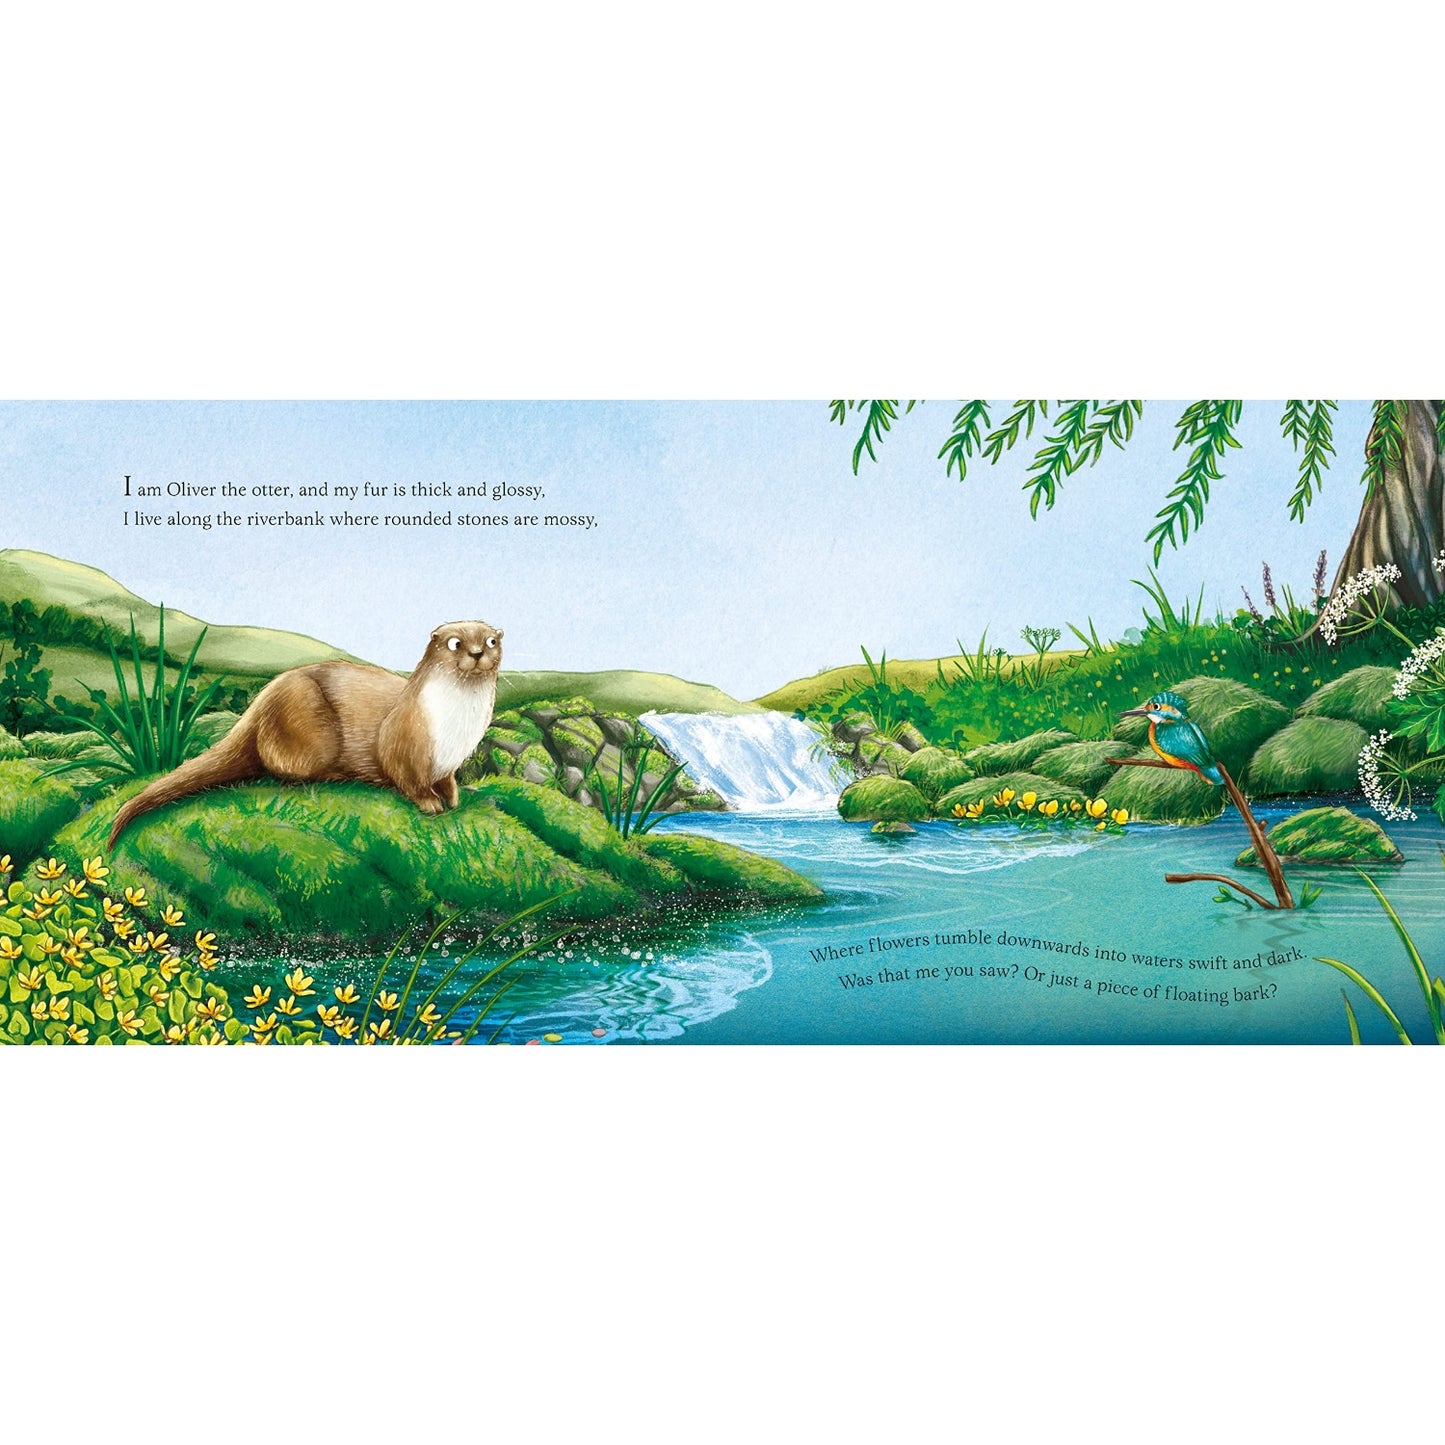 I am Oliver the Otter: A Tale from our Wild and Wonderful Riverbanks | Hardcover | Children’s Book on Nature